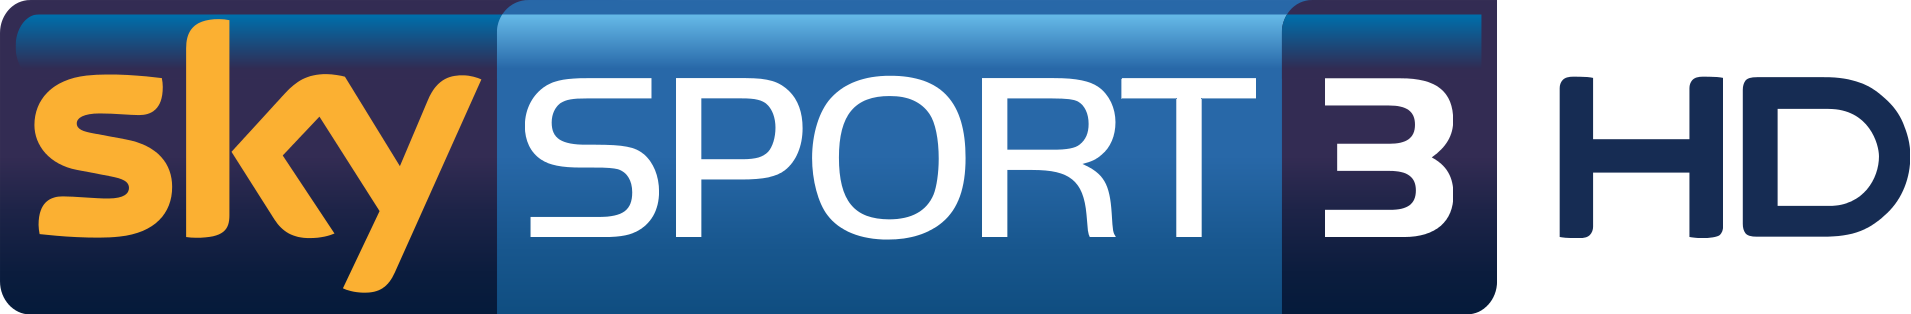 Sky Sport 3 Hd Italy 2010.png - Italy Images, Transparent background PNG HD thumbnail